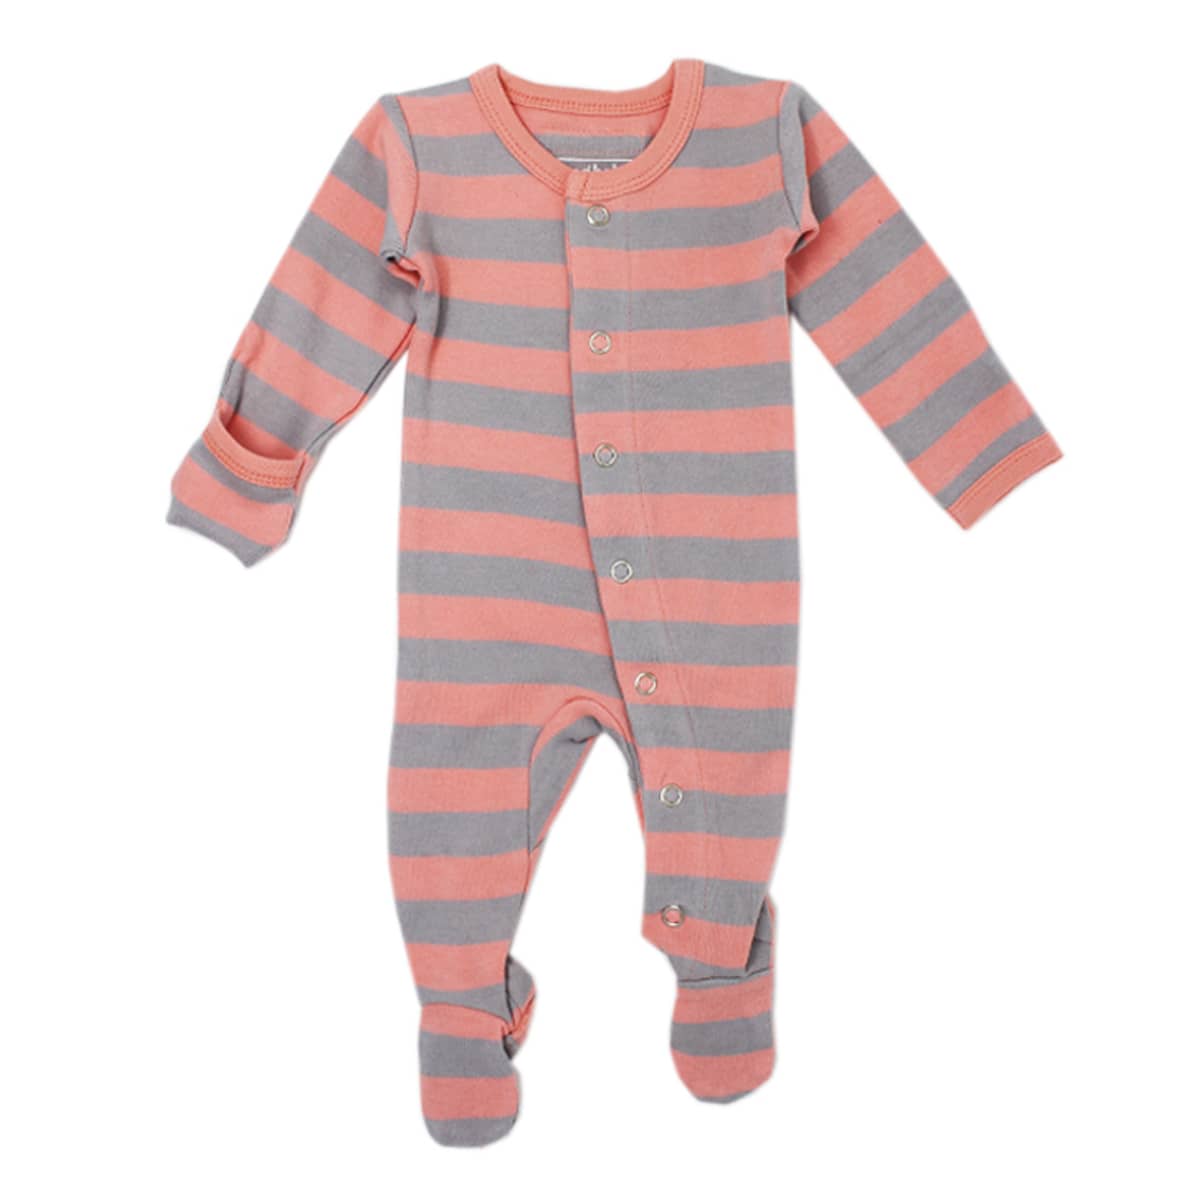 L'ovedbaby Organic Gl'oved Footed Overall - Wide Stripe - Coral Light Grey